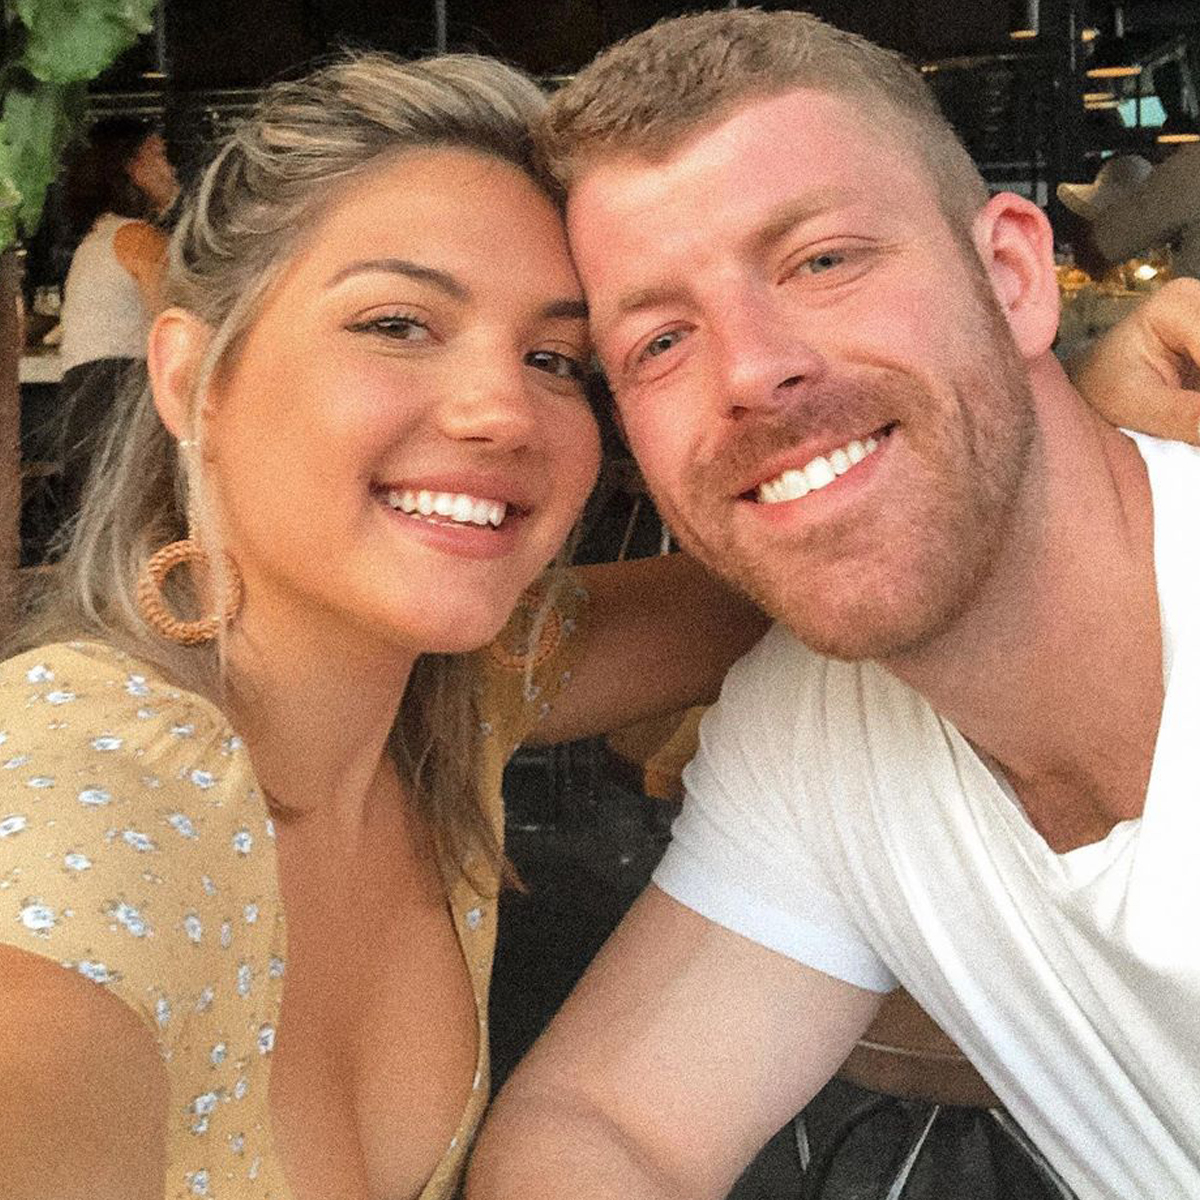 Giannina Gibelli Wanted to Be 'Open' to Love After Damian Powers Split